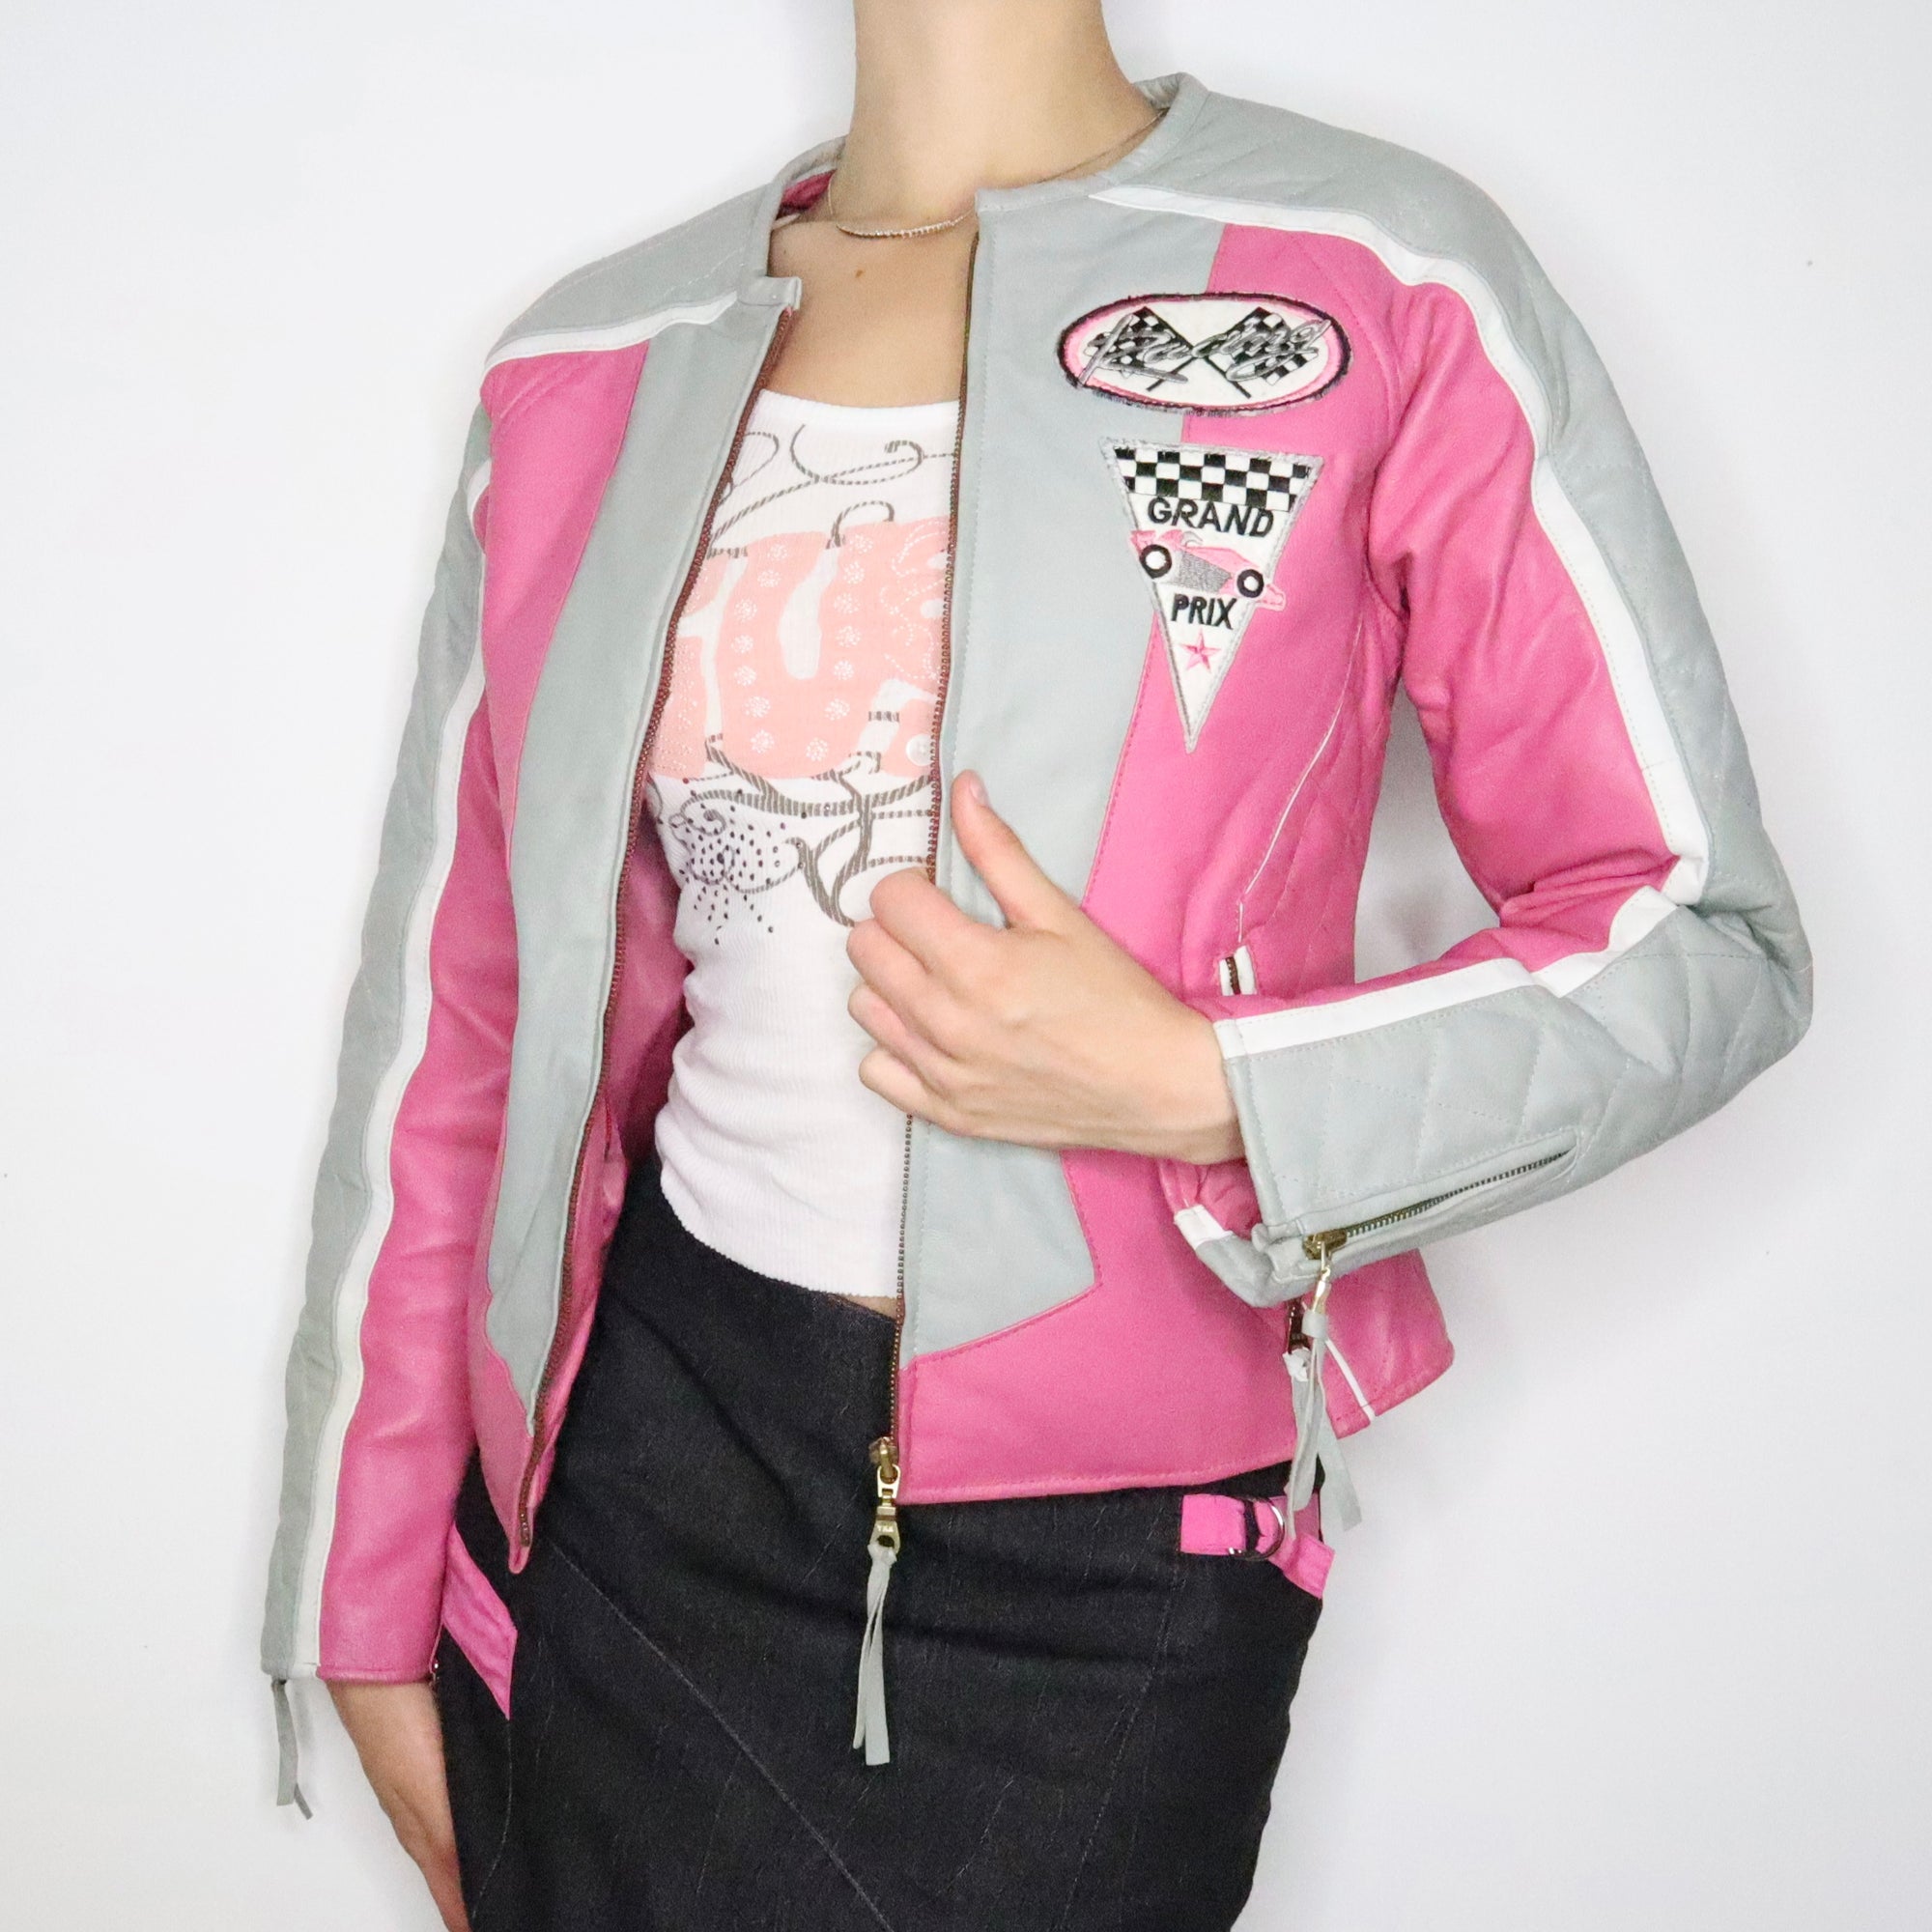 Pink Leather Racer Jacket (Small)